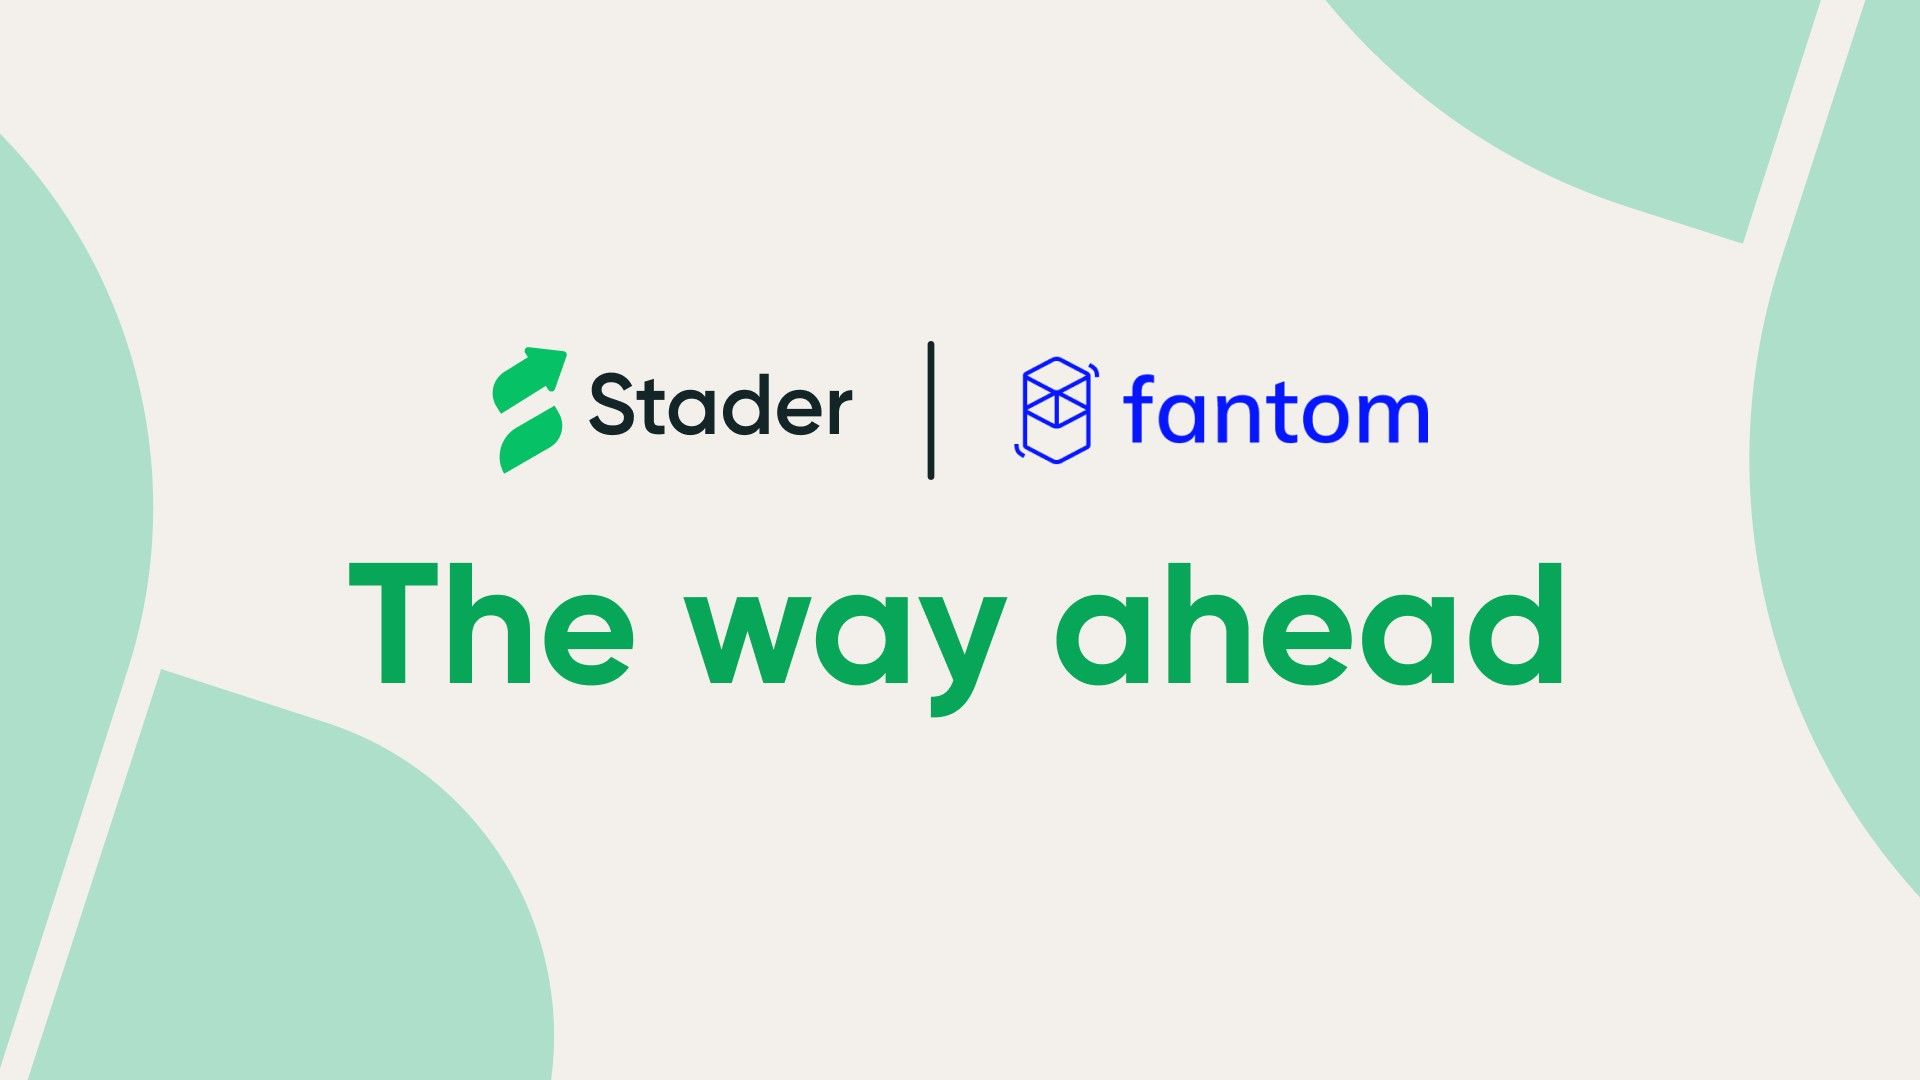 Stader x Fantom: What Does the Future Hold?